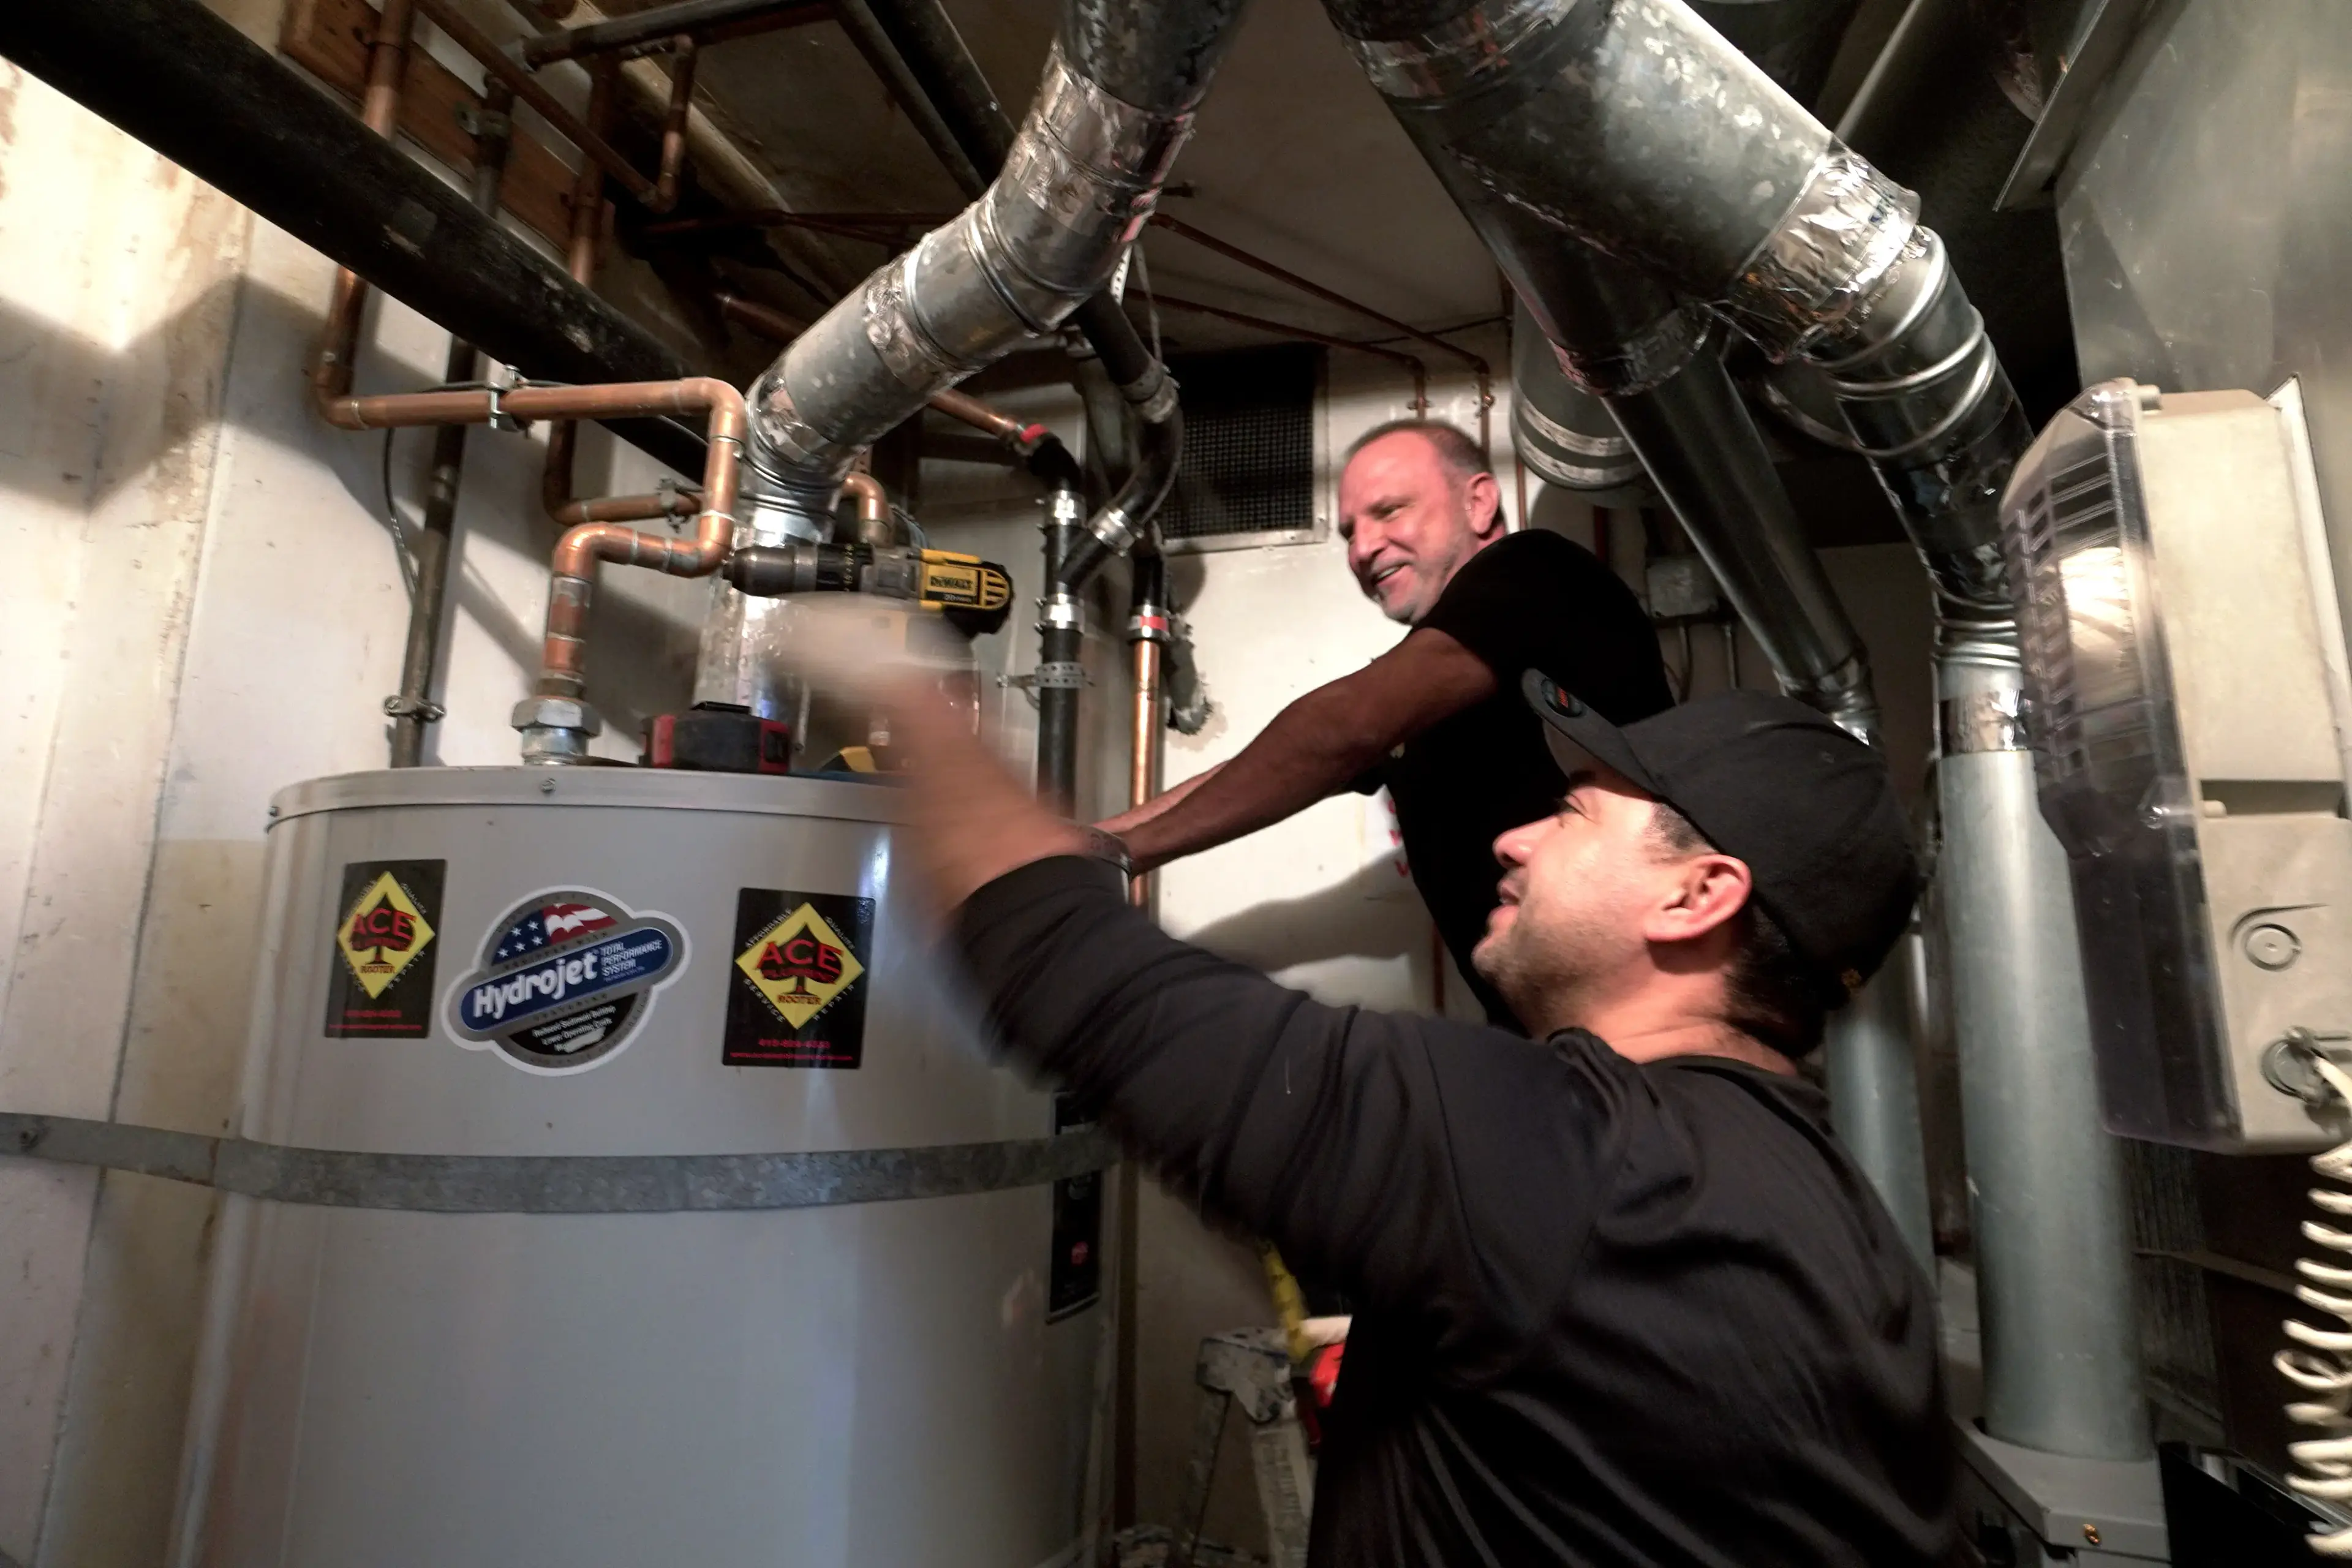 Picture of Ace Plumbing and Rooter - Ace Plumbing and Rooter